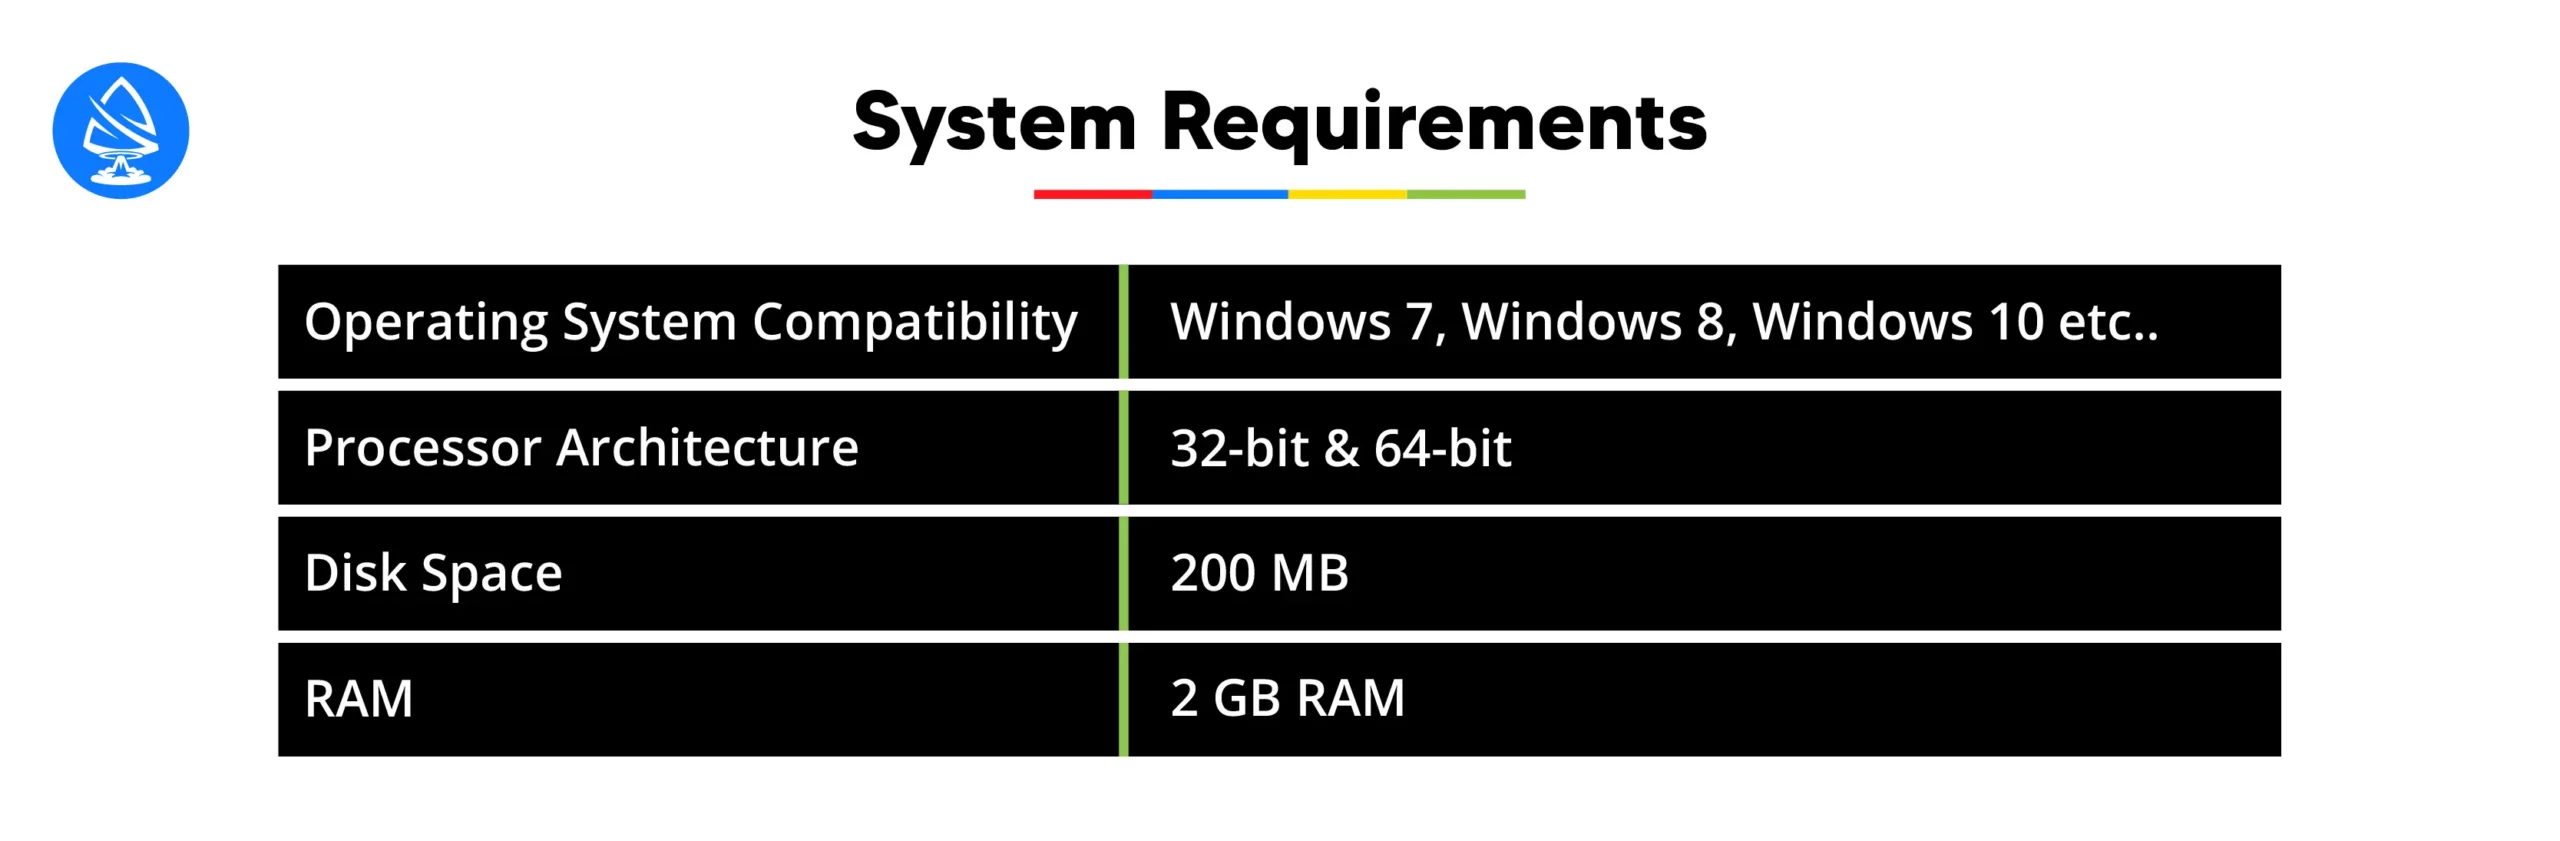 System Requirements for Installing Node.js on Windows 